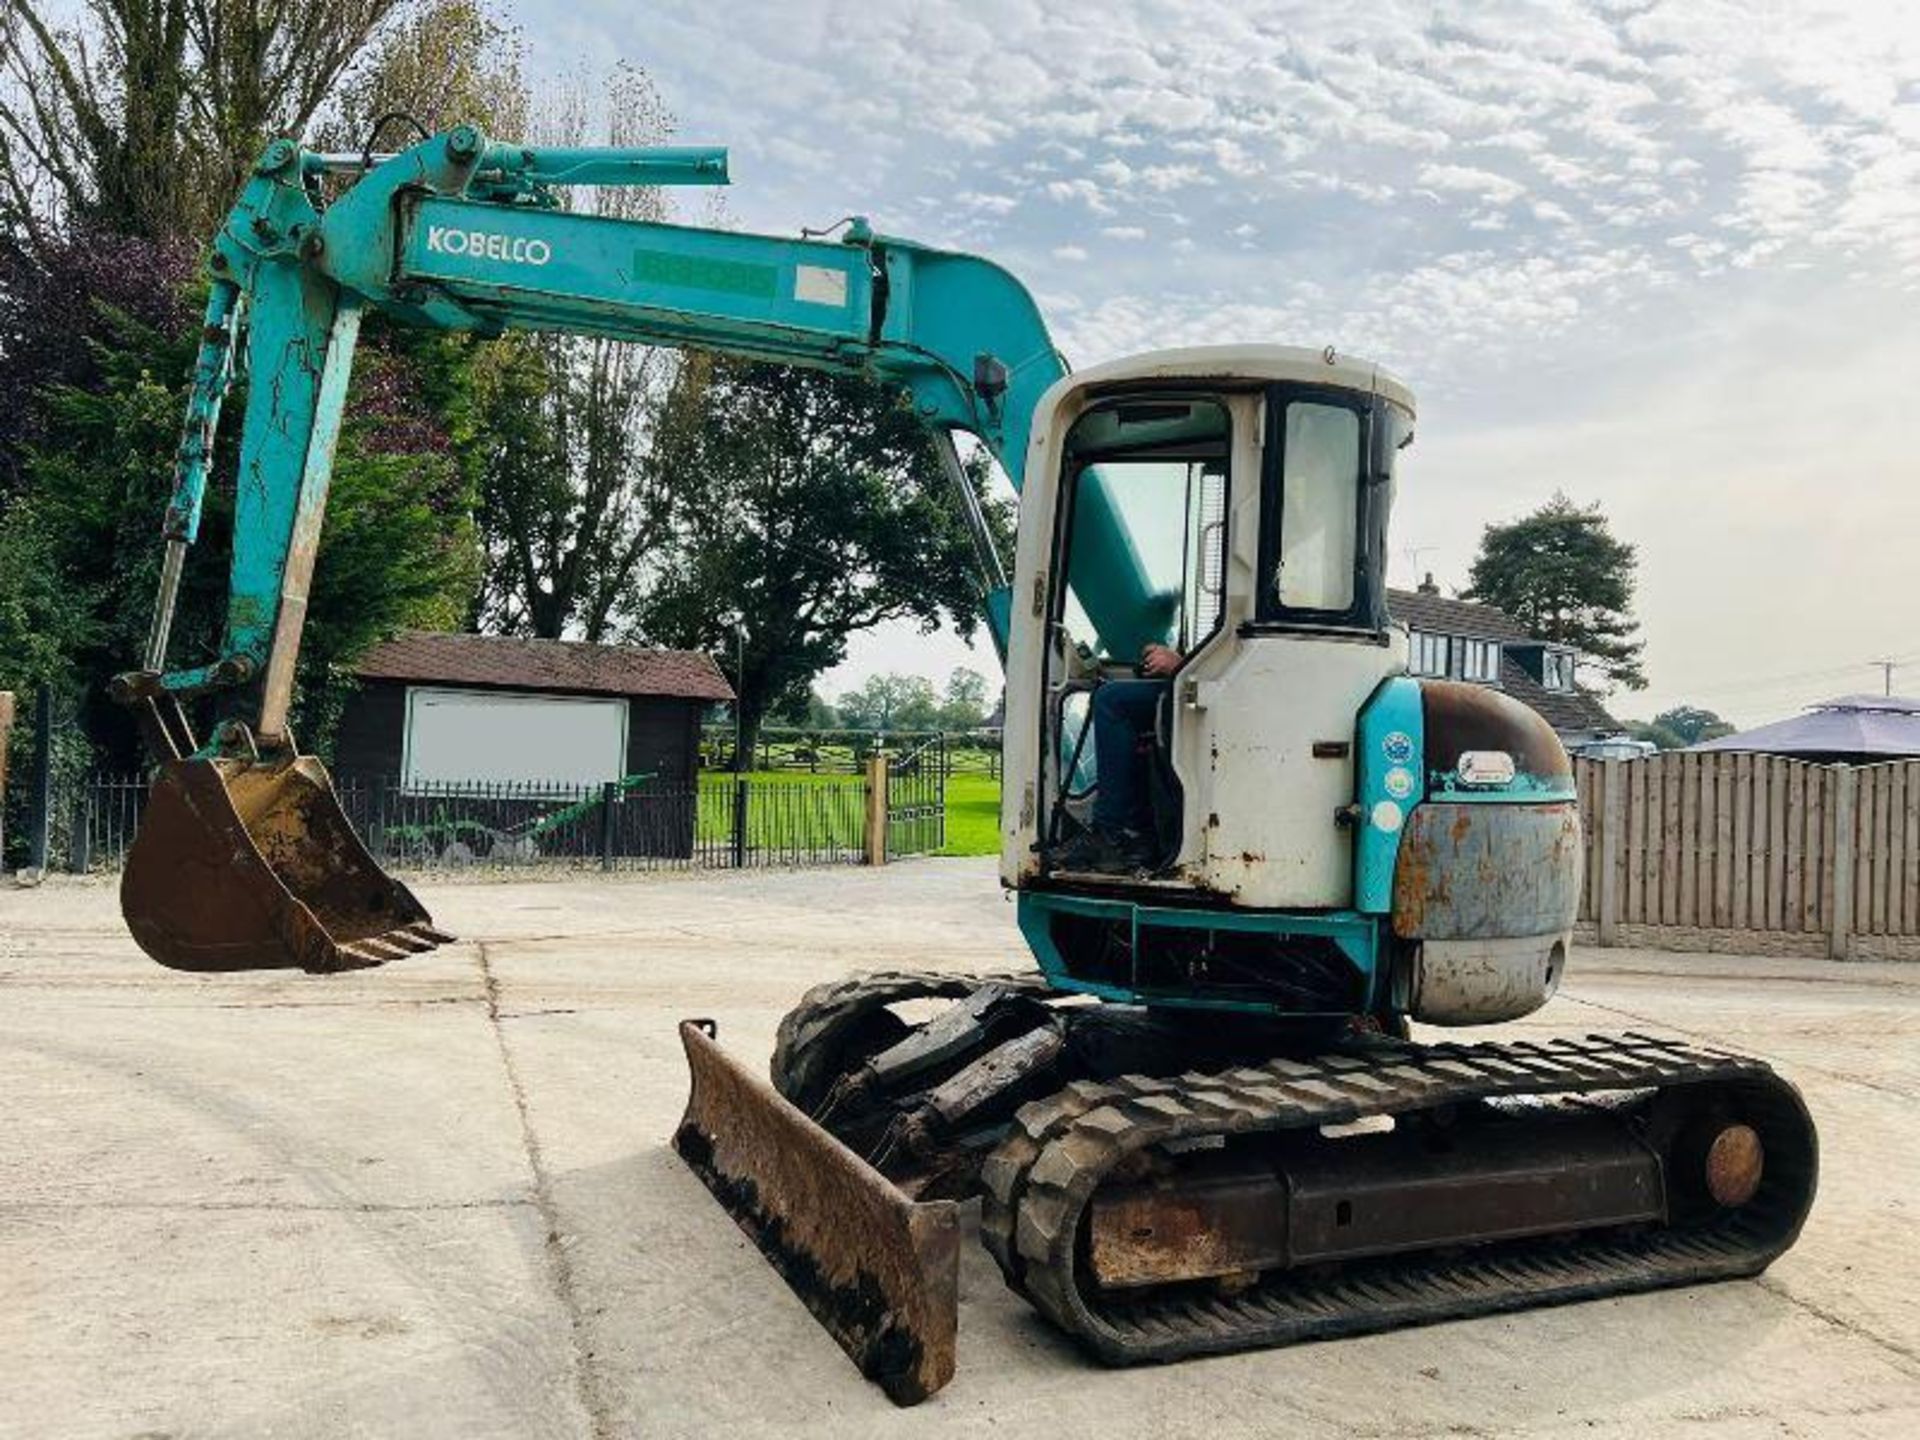 KOBELCO SK75UR TRACKED EXCAVATOR C/W FRONT BLADE AND RUBBER TRACKS